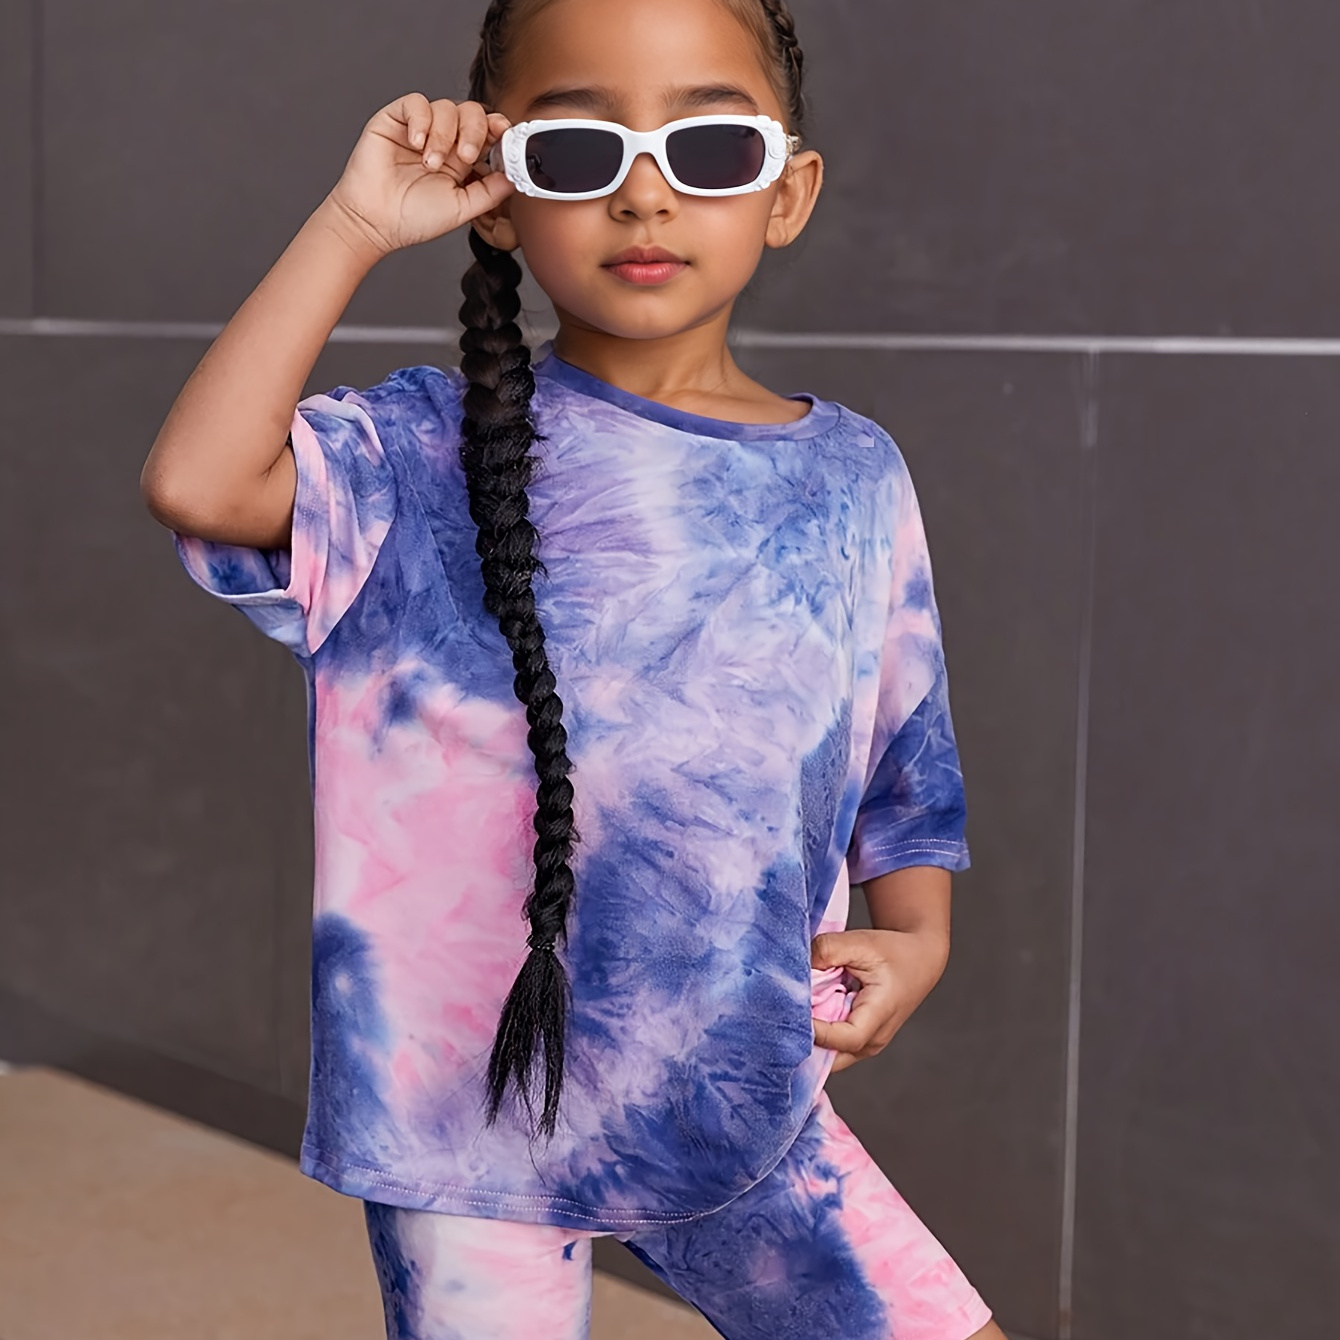 

2 Pcs Hipster Tie Dye Short Sleeve Tee + Shorts Girl's Co-ords Set, Comfy Casual Summer Outfit Clothes